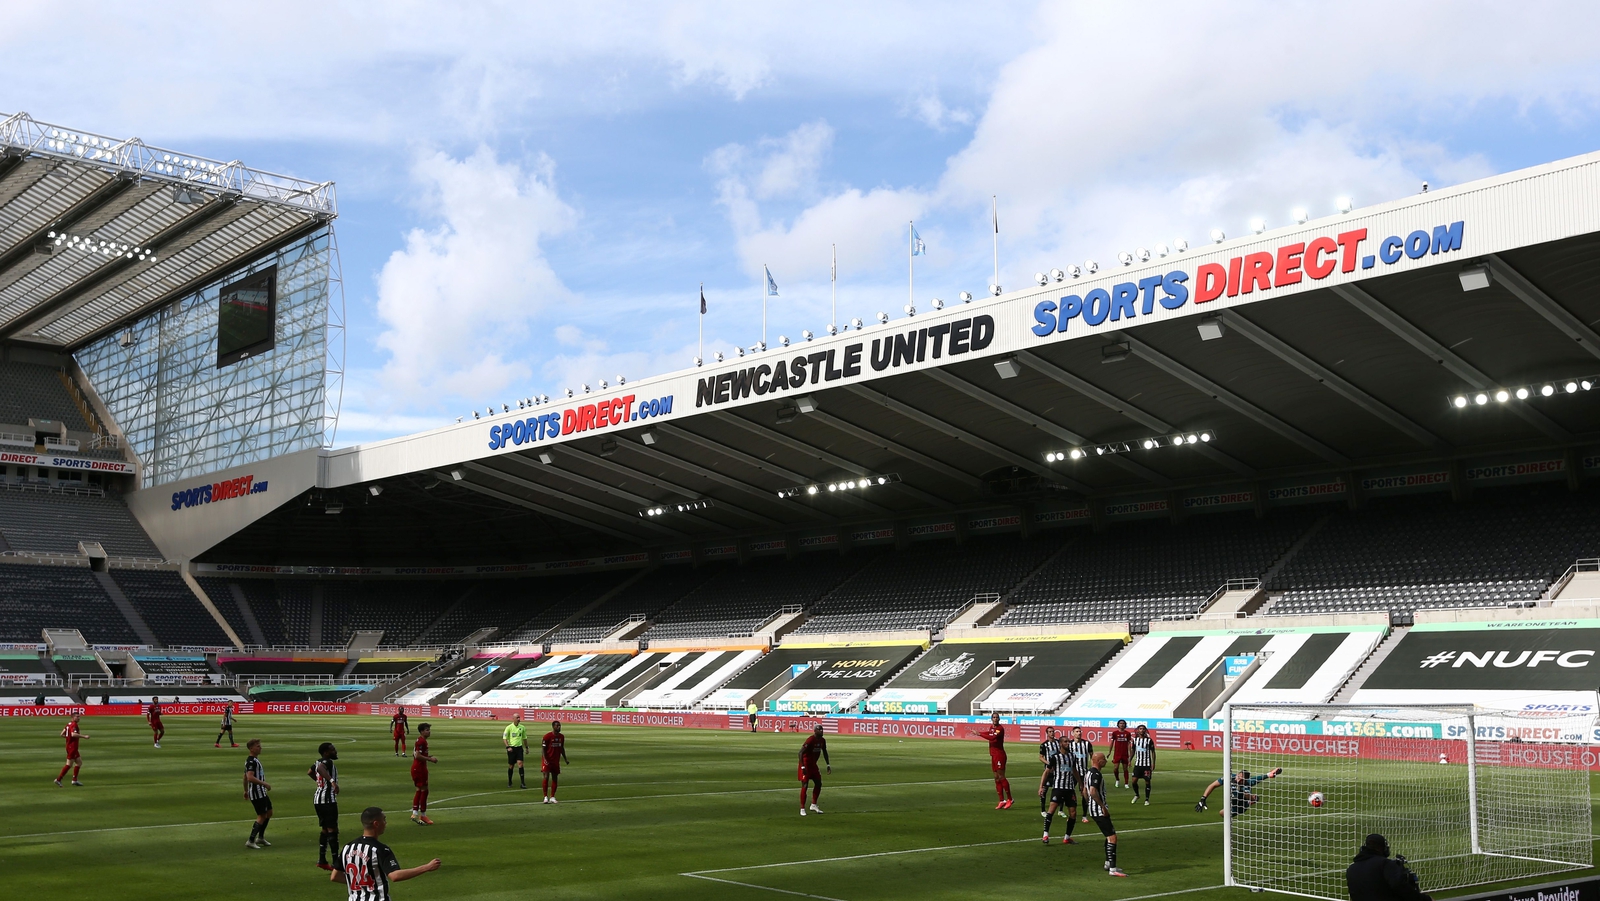 Saudi takeover of Newcastle United collapses